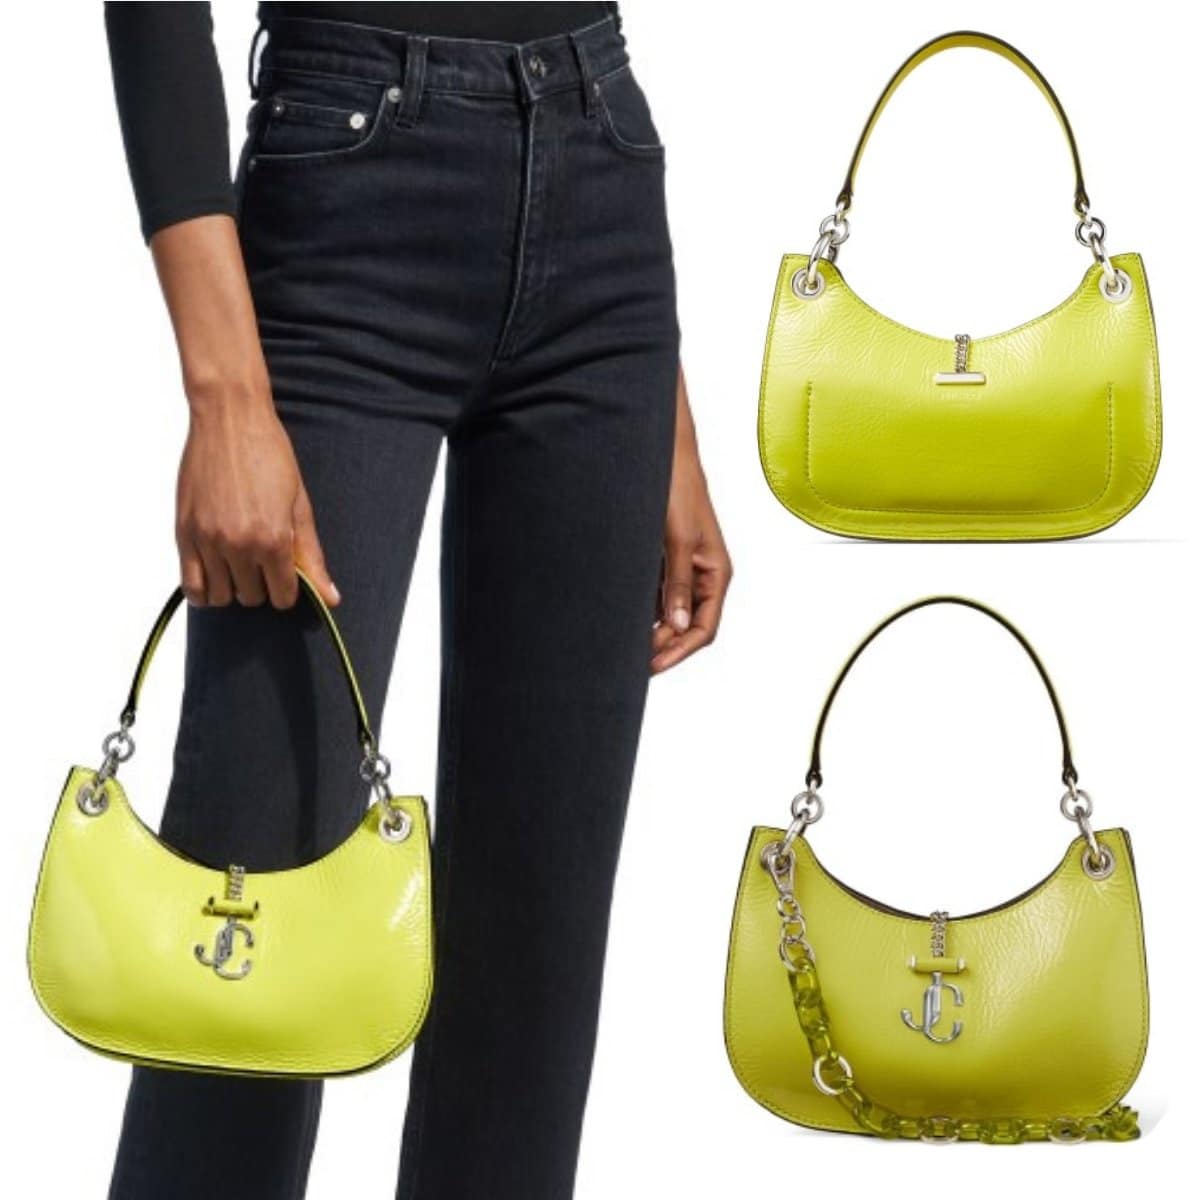 Jimmy Choo satchel crafted in Italy from lime patent textured leather and finished with an adjustable strap